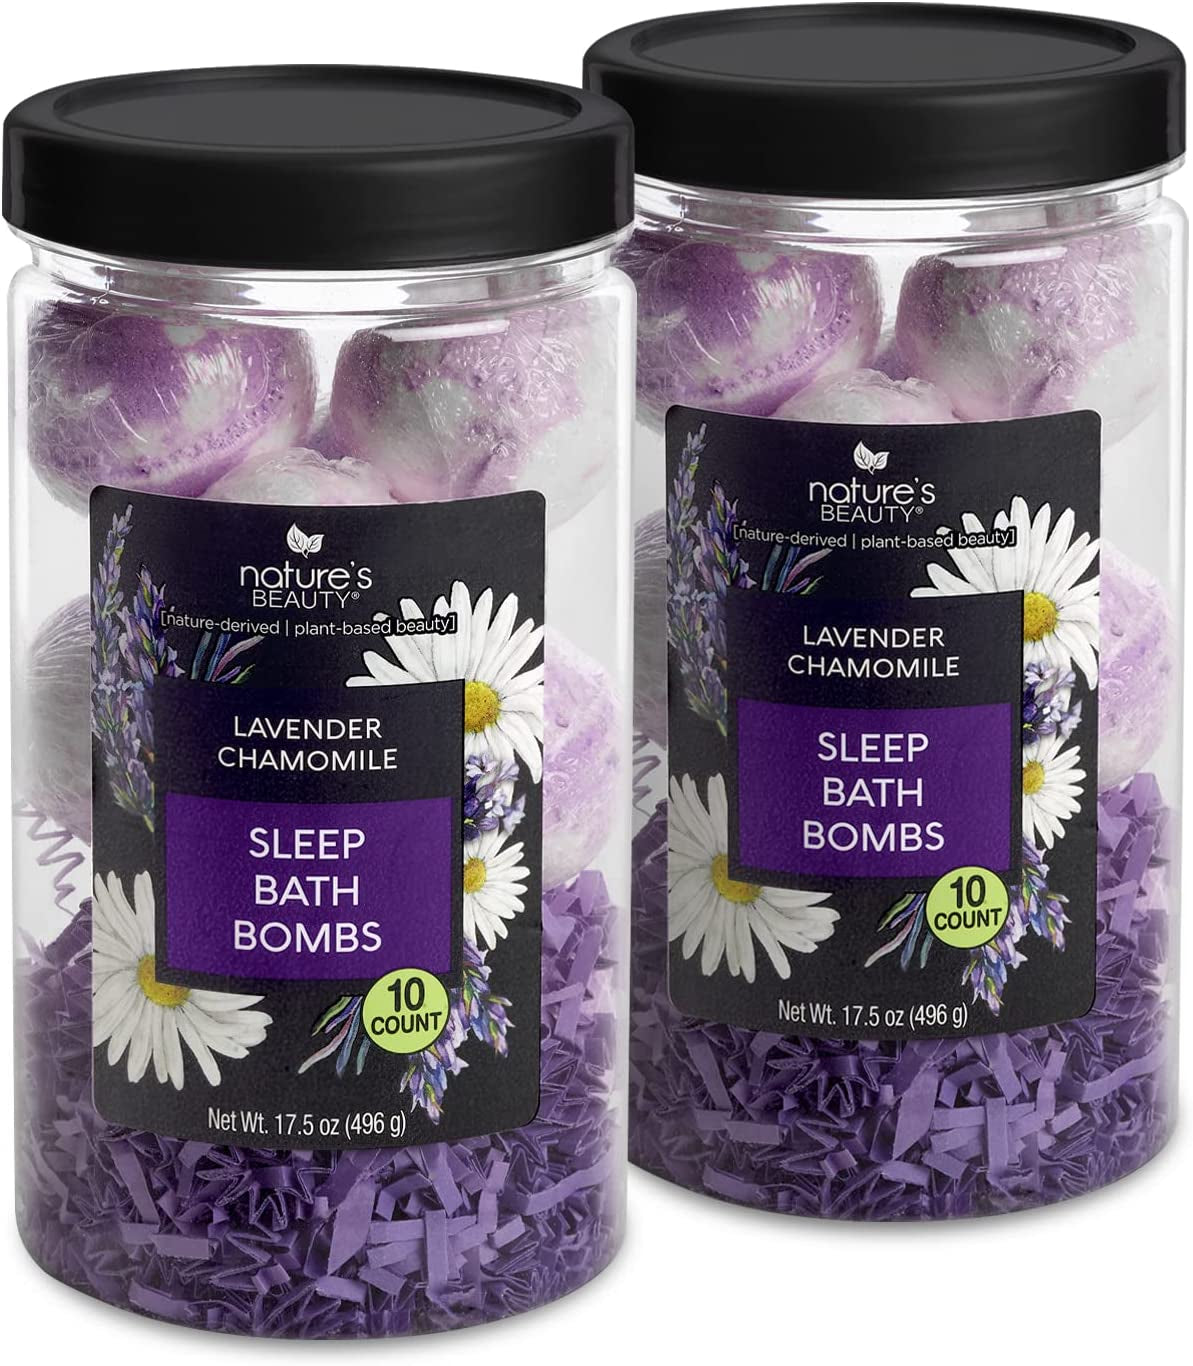 Nature'S Beauty Lavender Chamomile Sleep Bath Bomb Gift Set Multi-Pack- Luxury Fizzy Relax Spa Bomb W/Vanilla + Citrus Scent Made with Coconut Oil + Witch Hazel, 17.5 Oz | 10 Ct Ea (2 Pack)